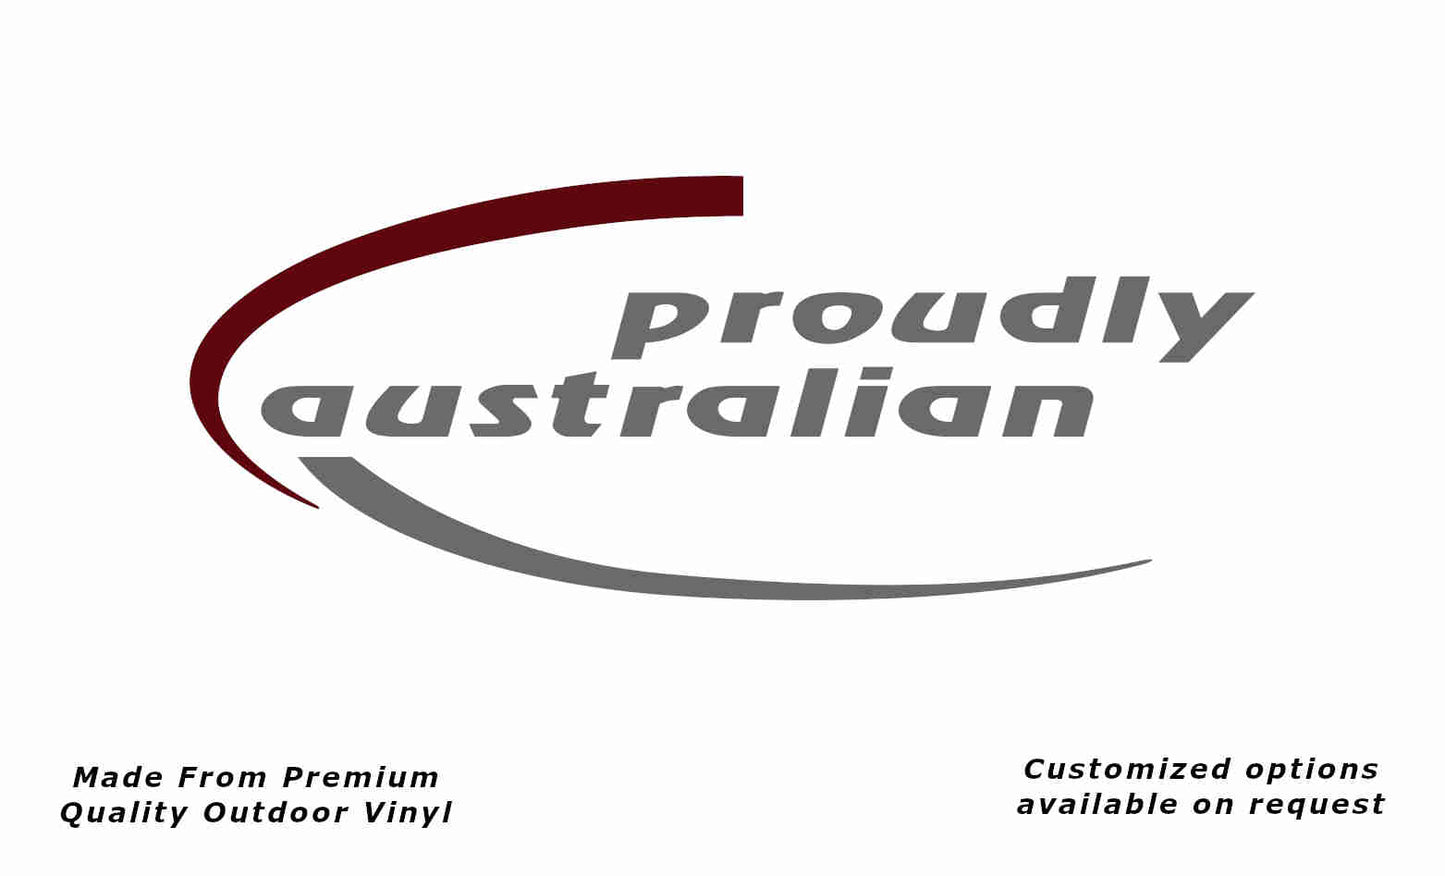 Avan proudly australian passenger side v1 caravan replacement vinyl decal sticker in silver grey and purple red.